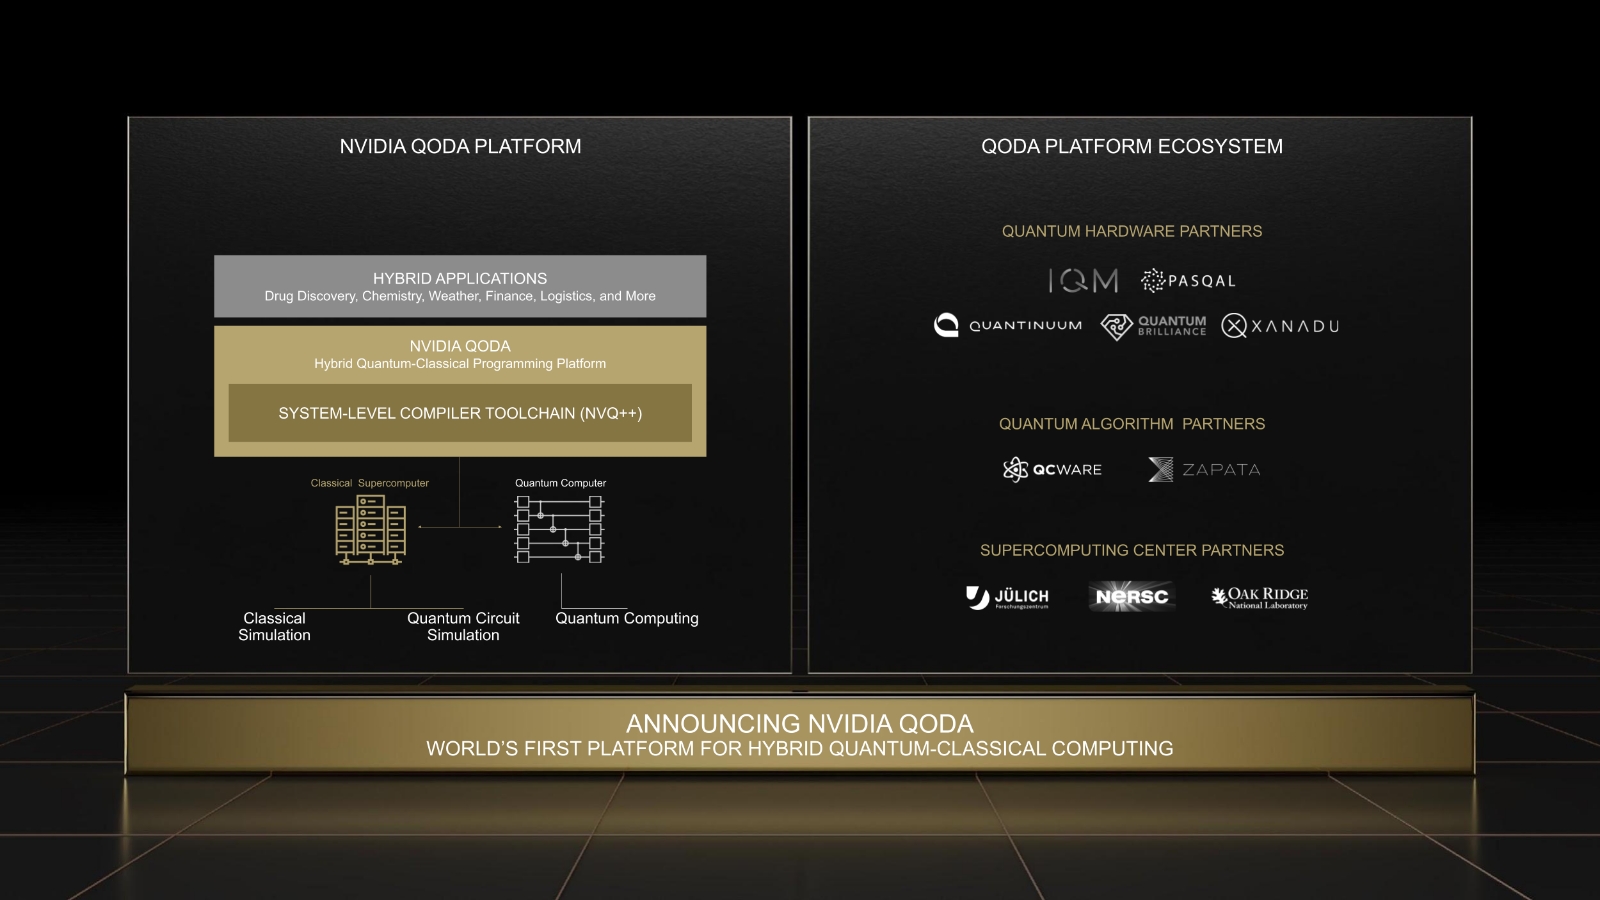 A diptych of the NVIDIA QODA platform and the QODA platform ecosystem which includes quantum hardware patterns, quantum algorithm partners, and supercomputing center partners.